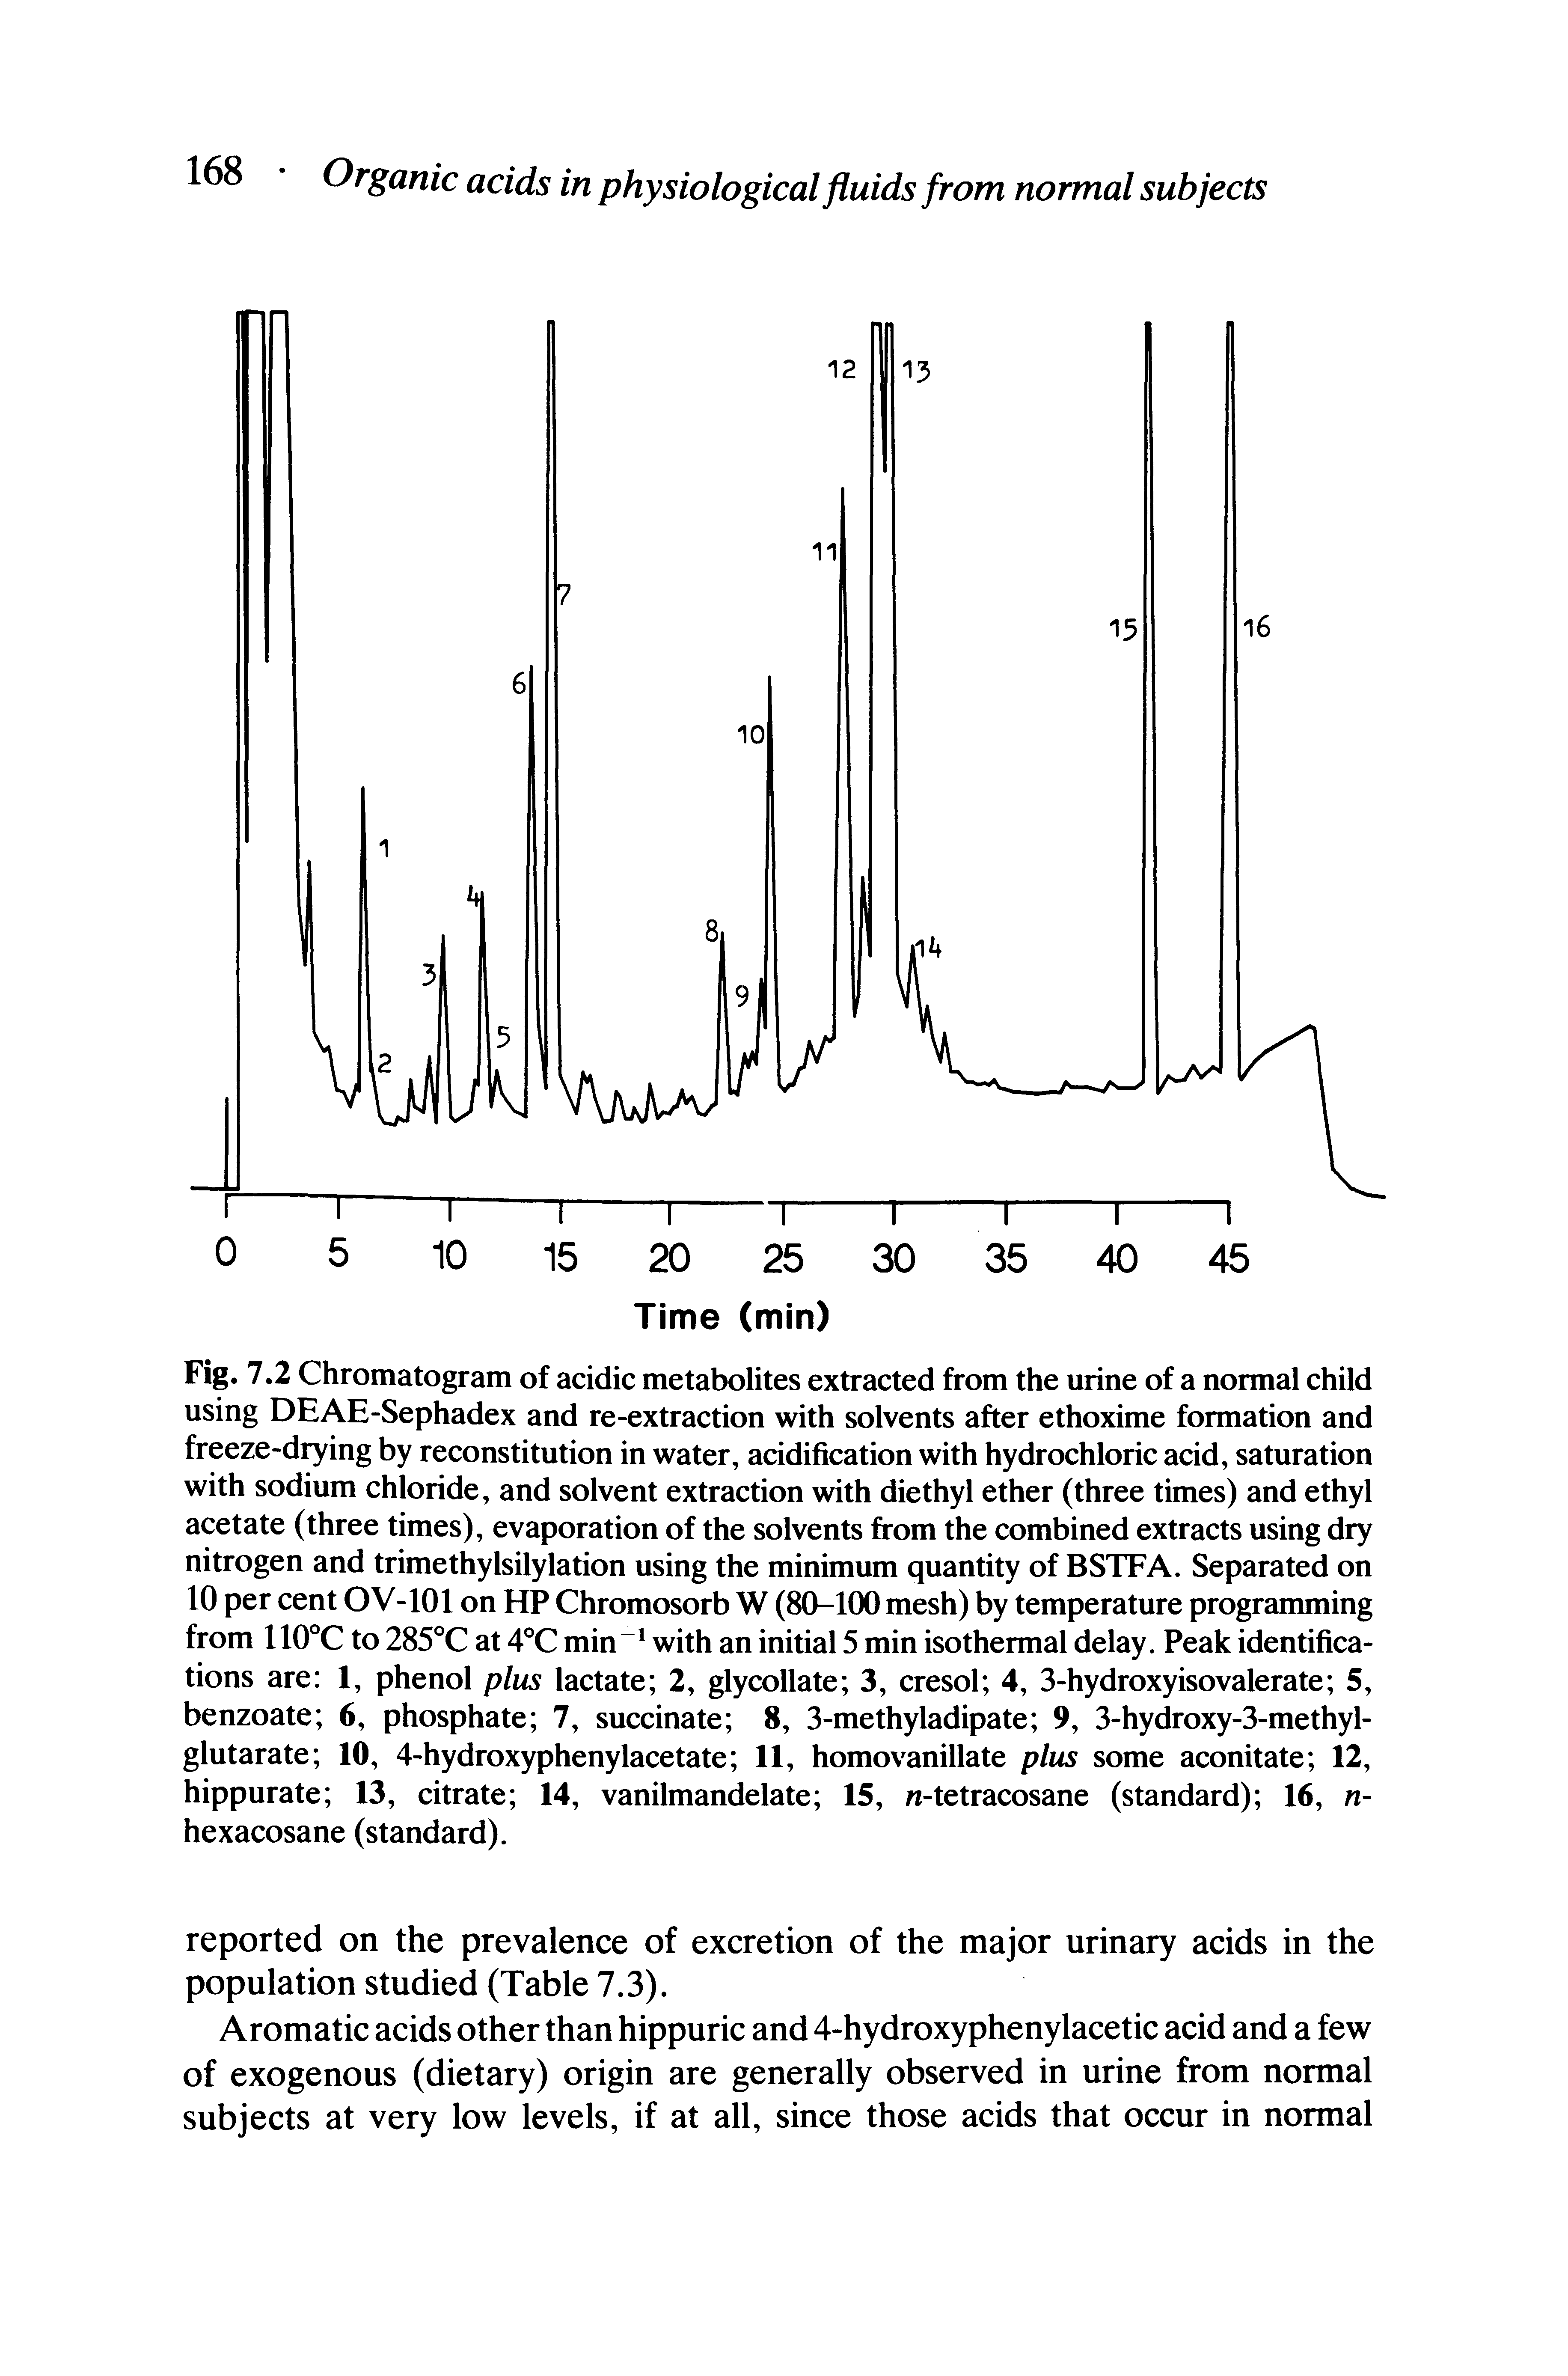 Fig. 7.2 Chromatogram of acidic metabolites extracted from the urine of a normal child using DEAE-Sephadex and re-extraction with solvents after ethoxime formation and freeze-drying by reconstitution in water, acidification with hydrochloric acid, saturation with sodium chloride, and solvent extraction with diethyl ether (three times) and ethyl acetate (three times), evaporation of the solvents from the combined extracts using dry nitrogen and trimethylsilylation using the minimum quantity of BSTFA. Separated on 10 per cent OV-101 on HP Chromosorb W (80-100 mesh) by temperature programming from 110°C to 285°C at 4°C min with an initial 5 min isothermal delay. Peak identifications are 1, phenol plus lactate 2, glycollate 3, cresol 4, 3-hydroxyisovalerate 5, benzoate 6, phosphate 7, succinate 8, 3-methyladipate 9, 3-hydroxy-3-methyl-glutarate 10, 4-hydroxyphenylacetate 11, homovanillate plus some aconitate 12, hippurate 13, citrate 14, vanilmandelate 15, n-tetracosane (standard) 16, n-hexacosane (standard).